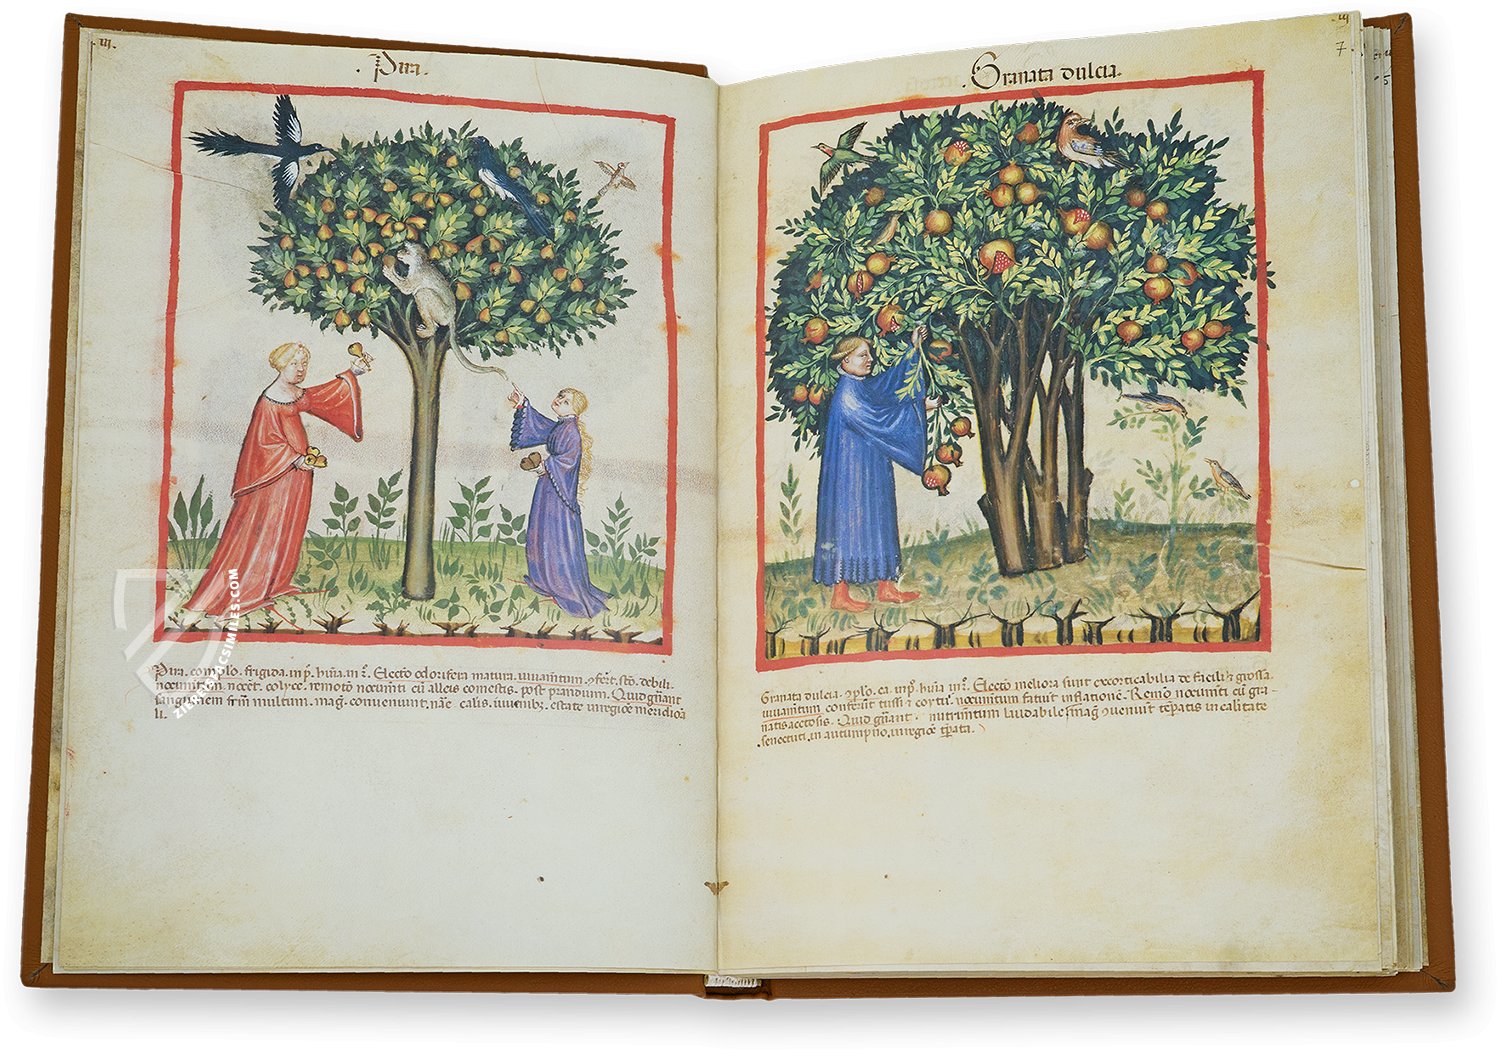 Paradisiacal images as an expression of aristocratic wishful thinking (Tacuinum Sanitatis in Medicina, Lombardy (Italy) – end of the 14th century)